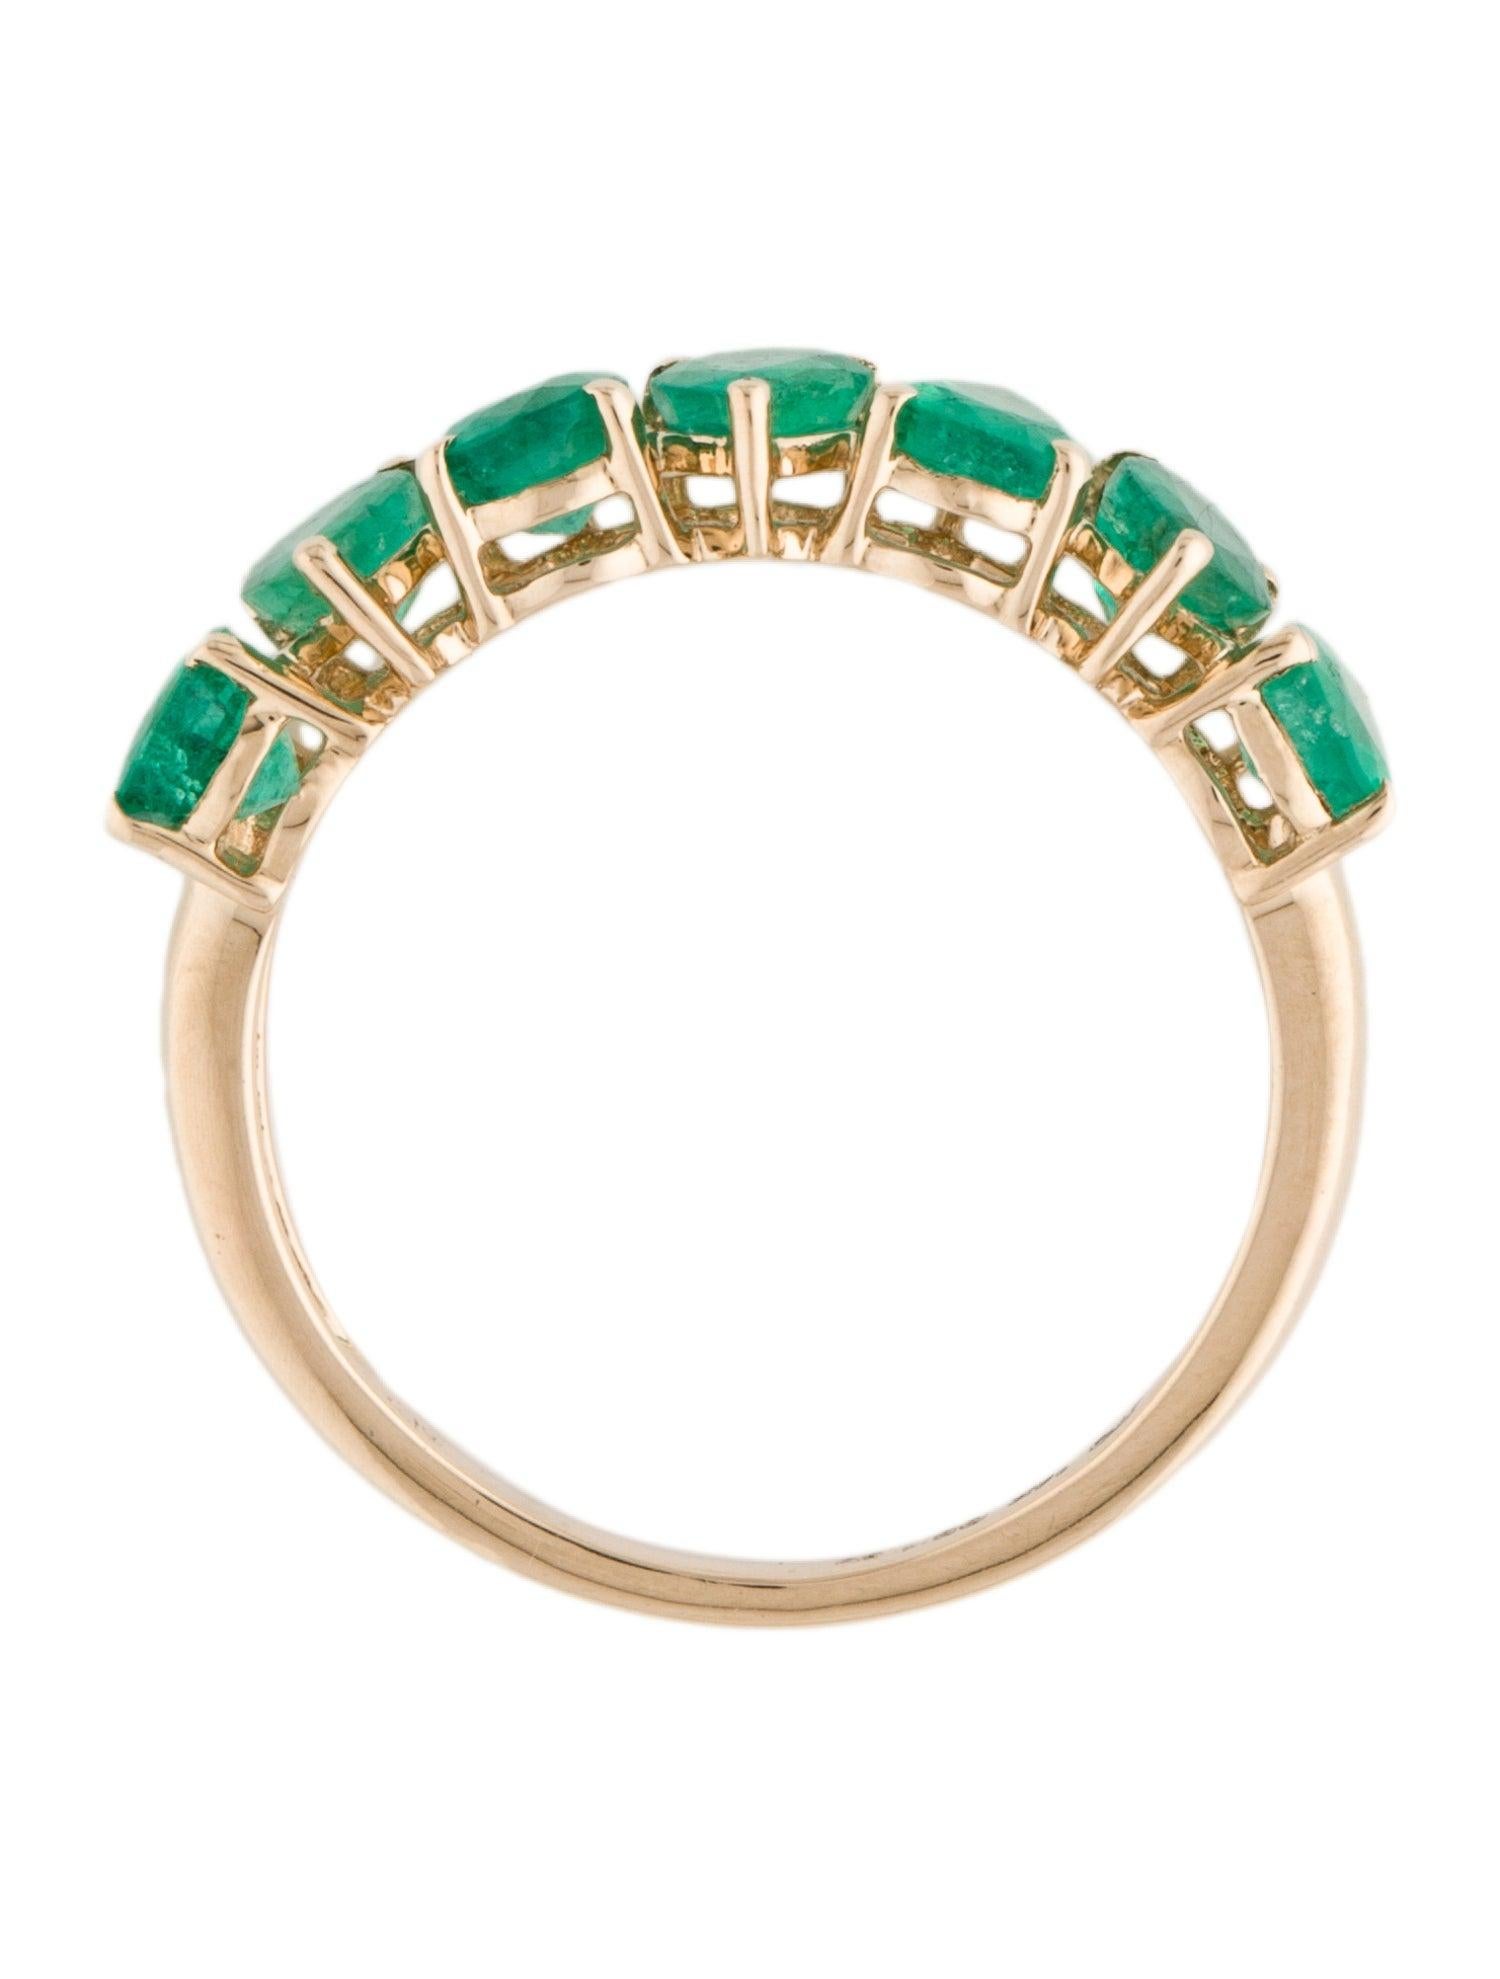 Exquisite 14K Gold 1.68ctw Emerald Band Ring - Size 7.75 - Fine Gemstone Jewelry In New Condition For Sale In Holtsville, NY